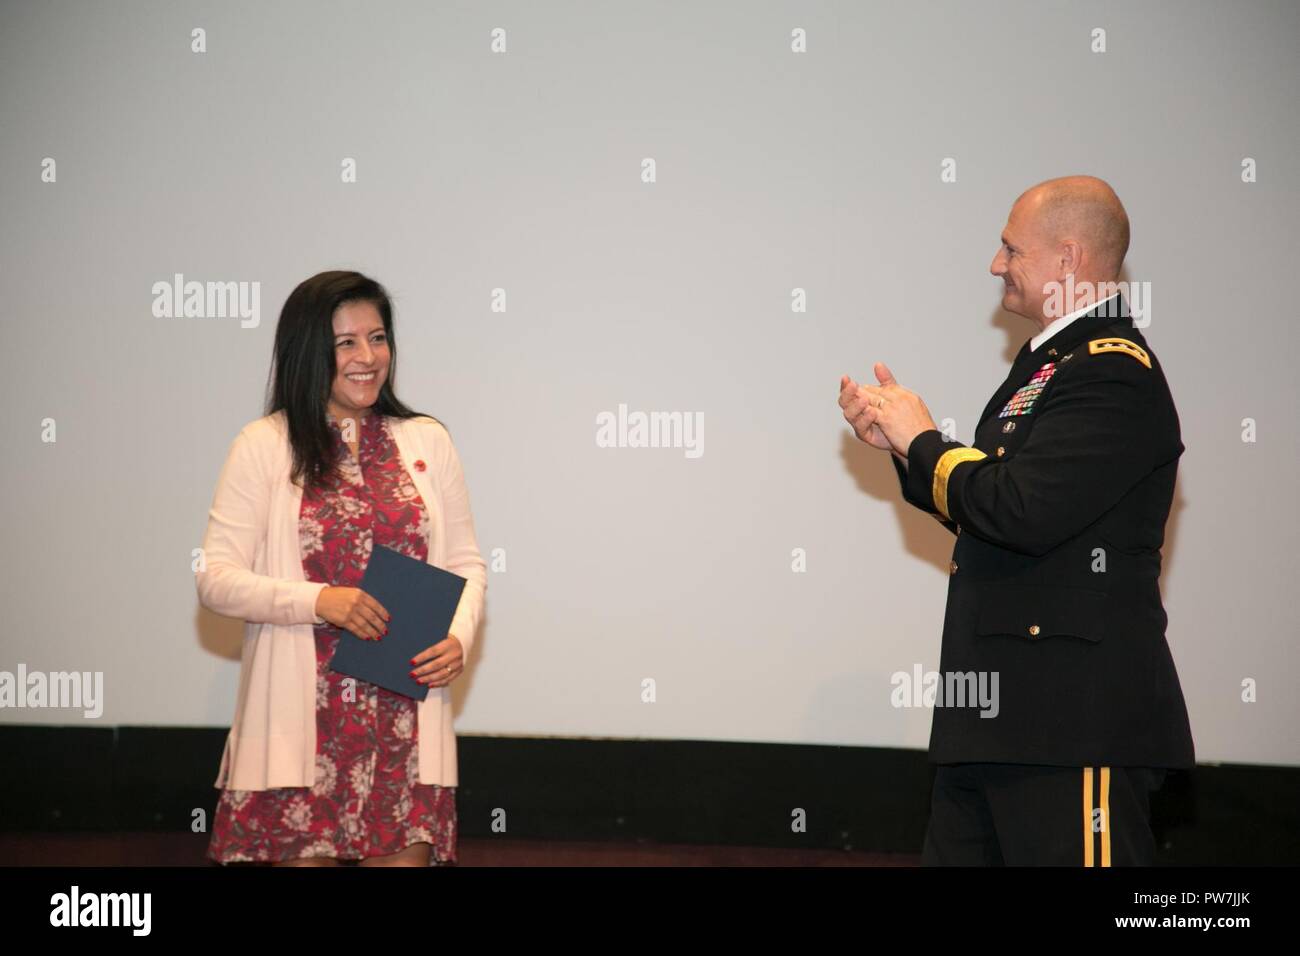 U.S. Army Lt. Gen. Edward Daly, Army Materiel Command deputy commander and Redstone senior commander, presents an award to Christine Chavez, the keynote speaker during the Hispanic-American Heritage Month Observance Sept. 25, 2017 at Redstone Arsenal, Alabama.  Chavez is the granddaughter of labor leader and civil rights activist Cesar Chavez. Stock Photo